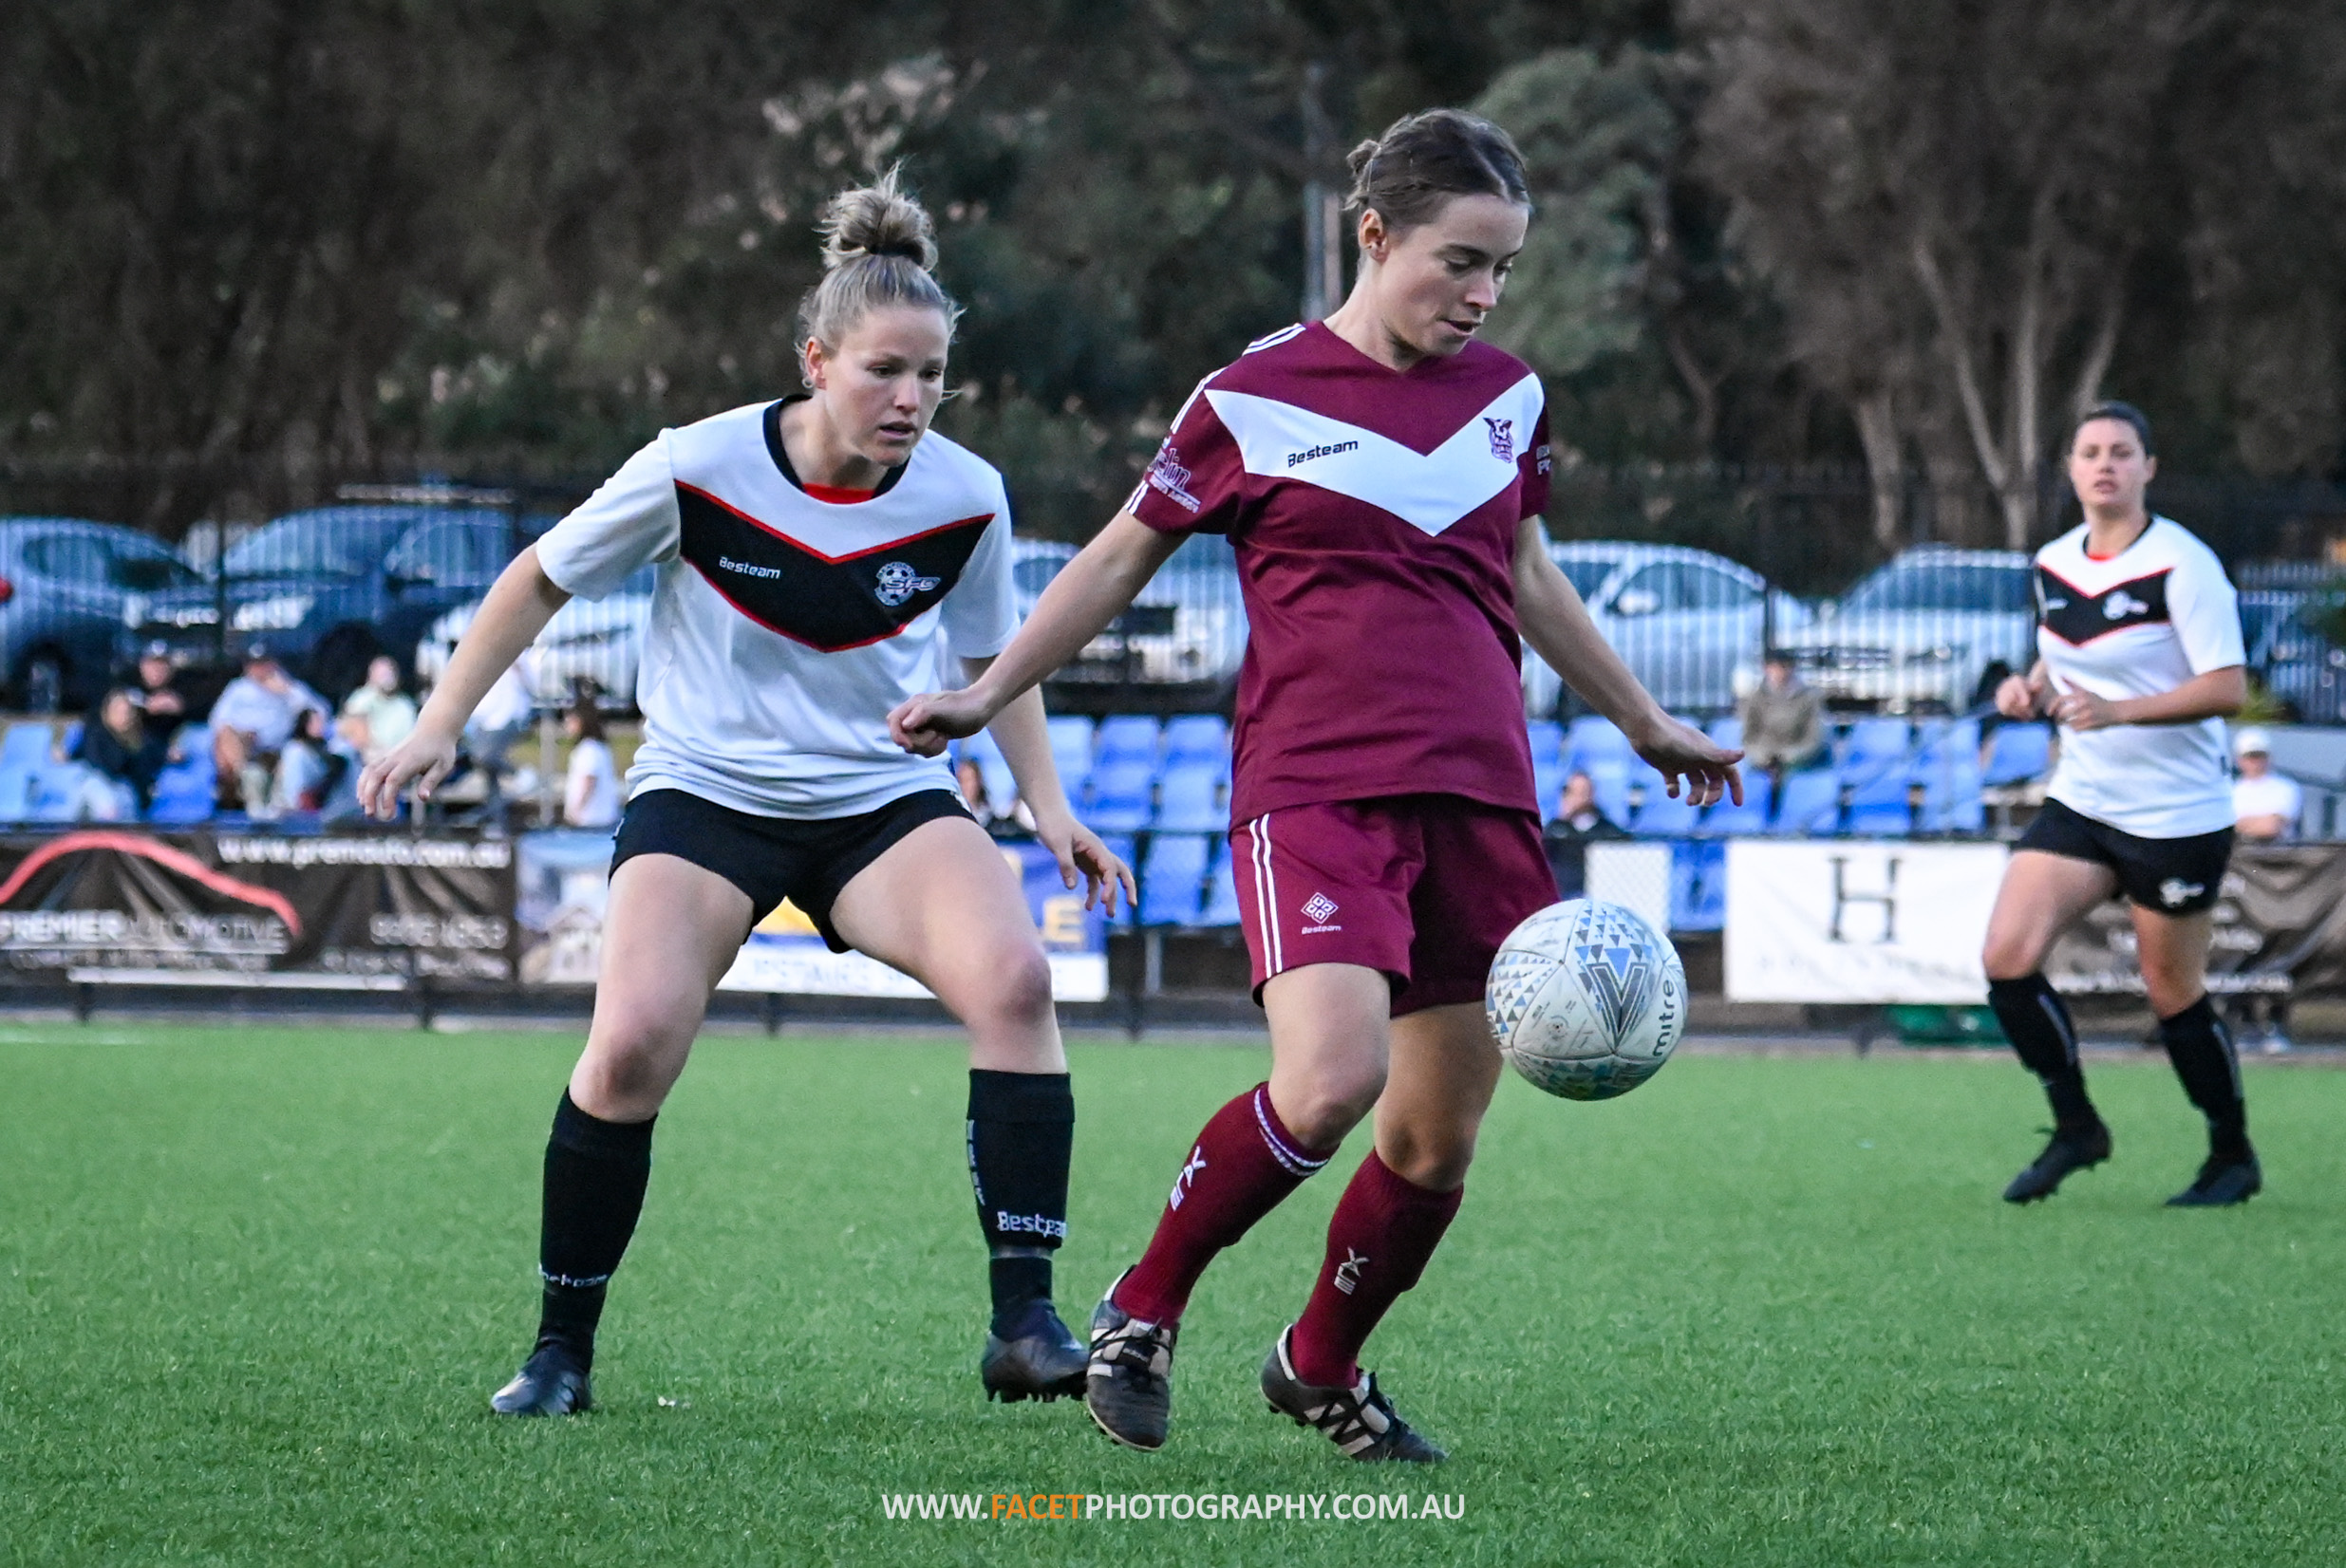 Action from the 2022 MWFA Women's Premier League Grand Final between Seaforth and Manly Vale. Photo credit: Jeremy Denham